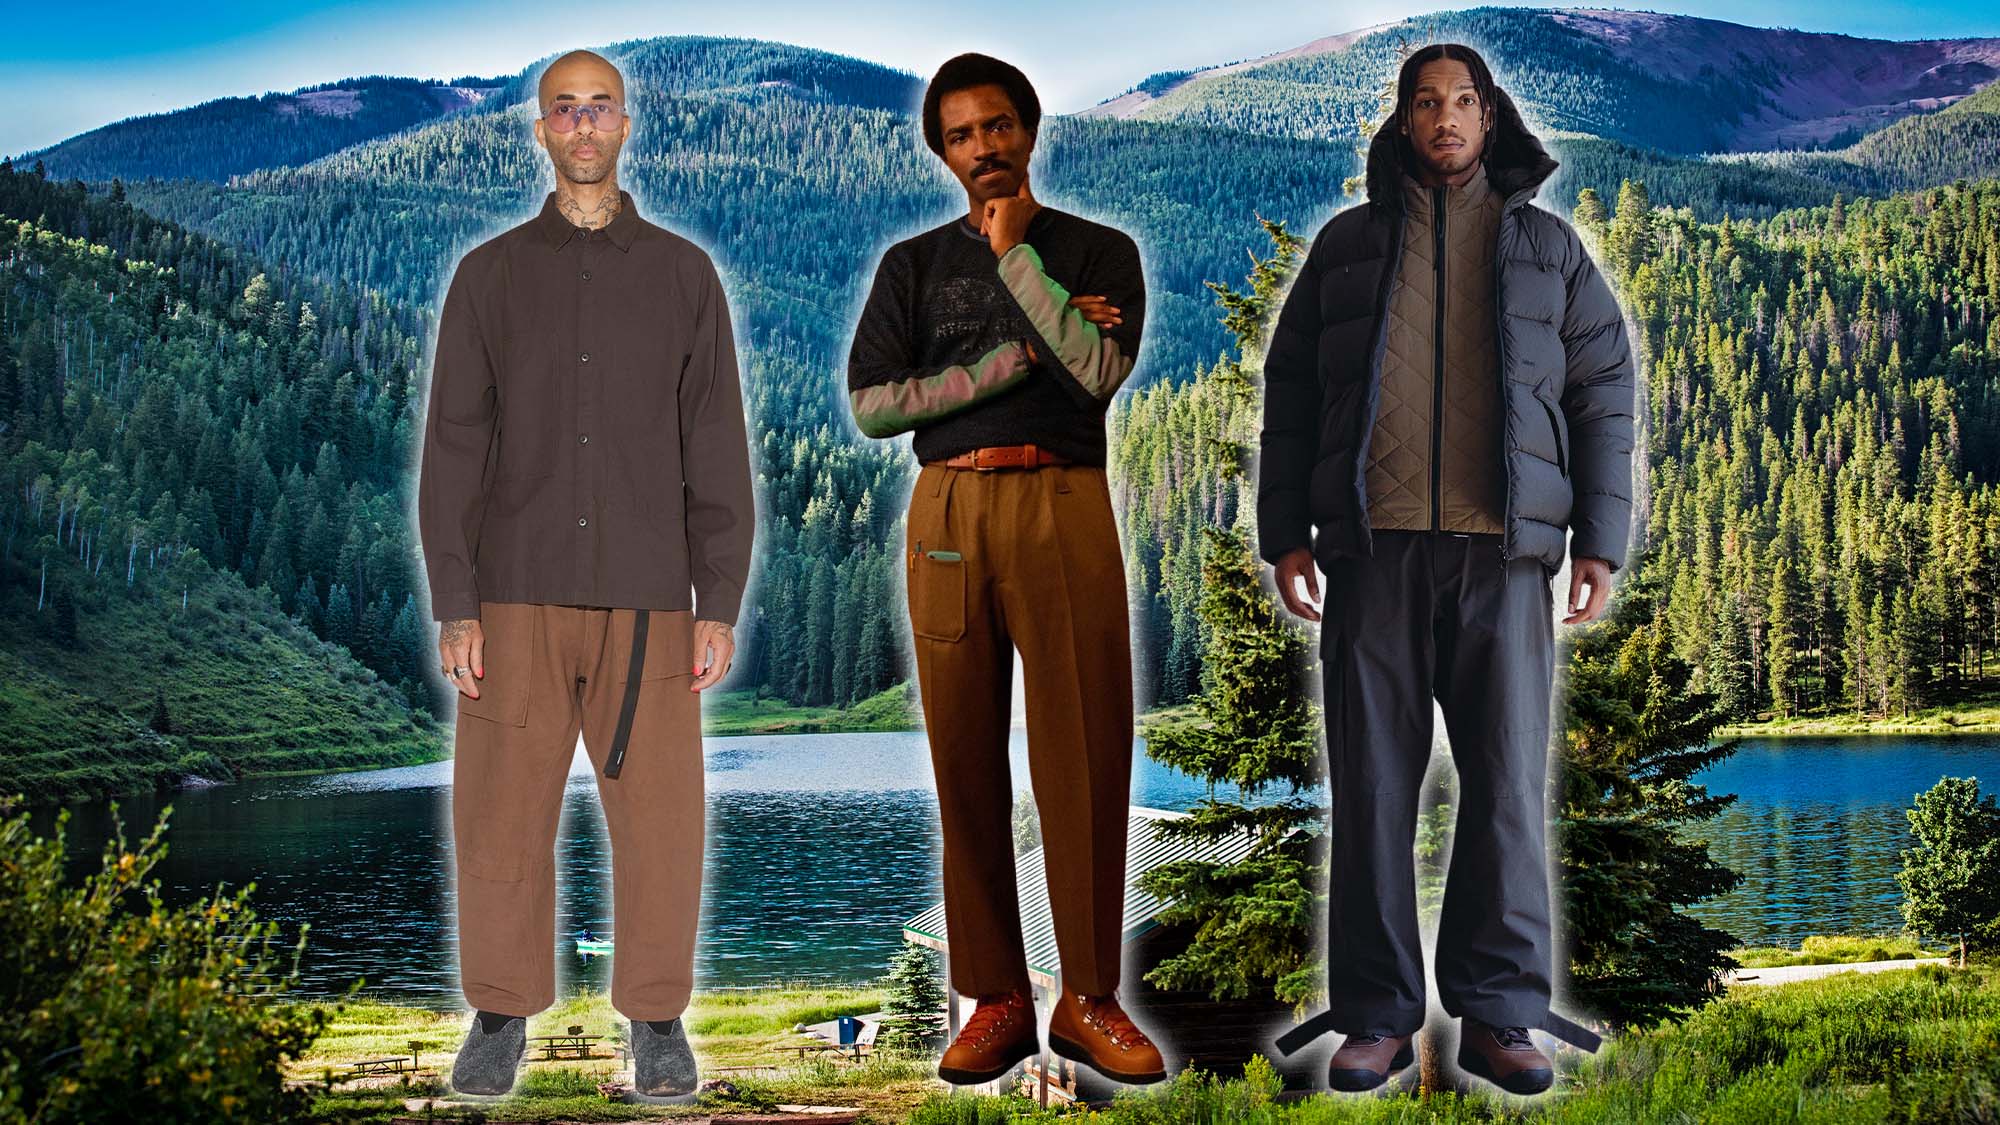 Three men wearing fashionable outdoor gear on a outdoor background of a cabin in the mountains